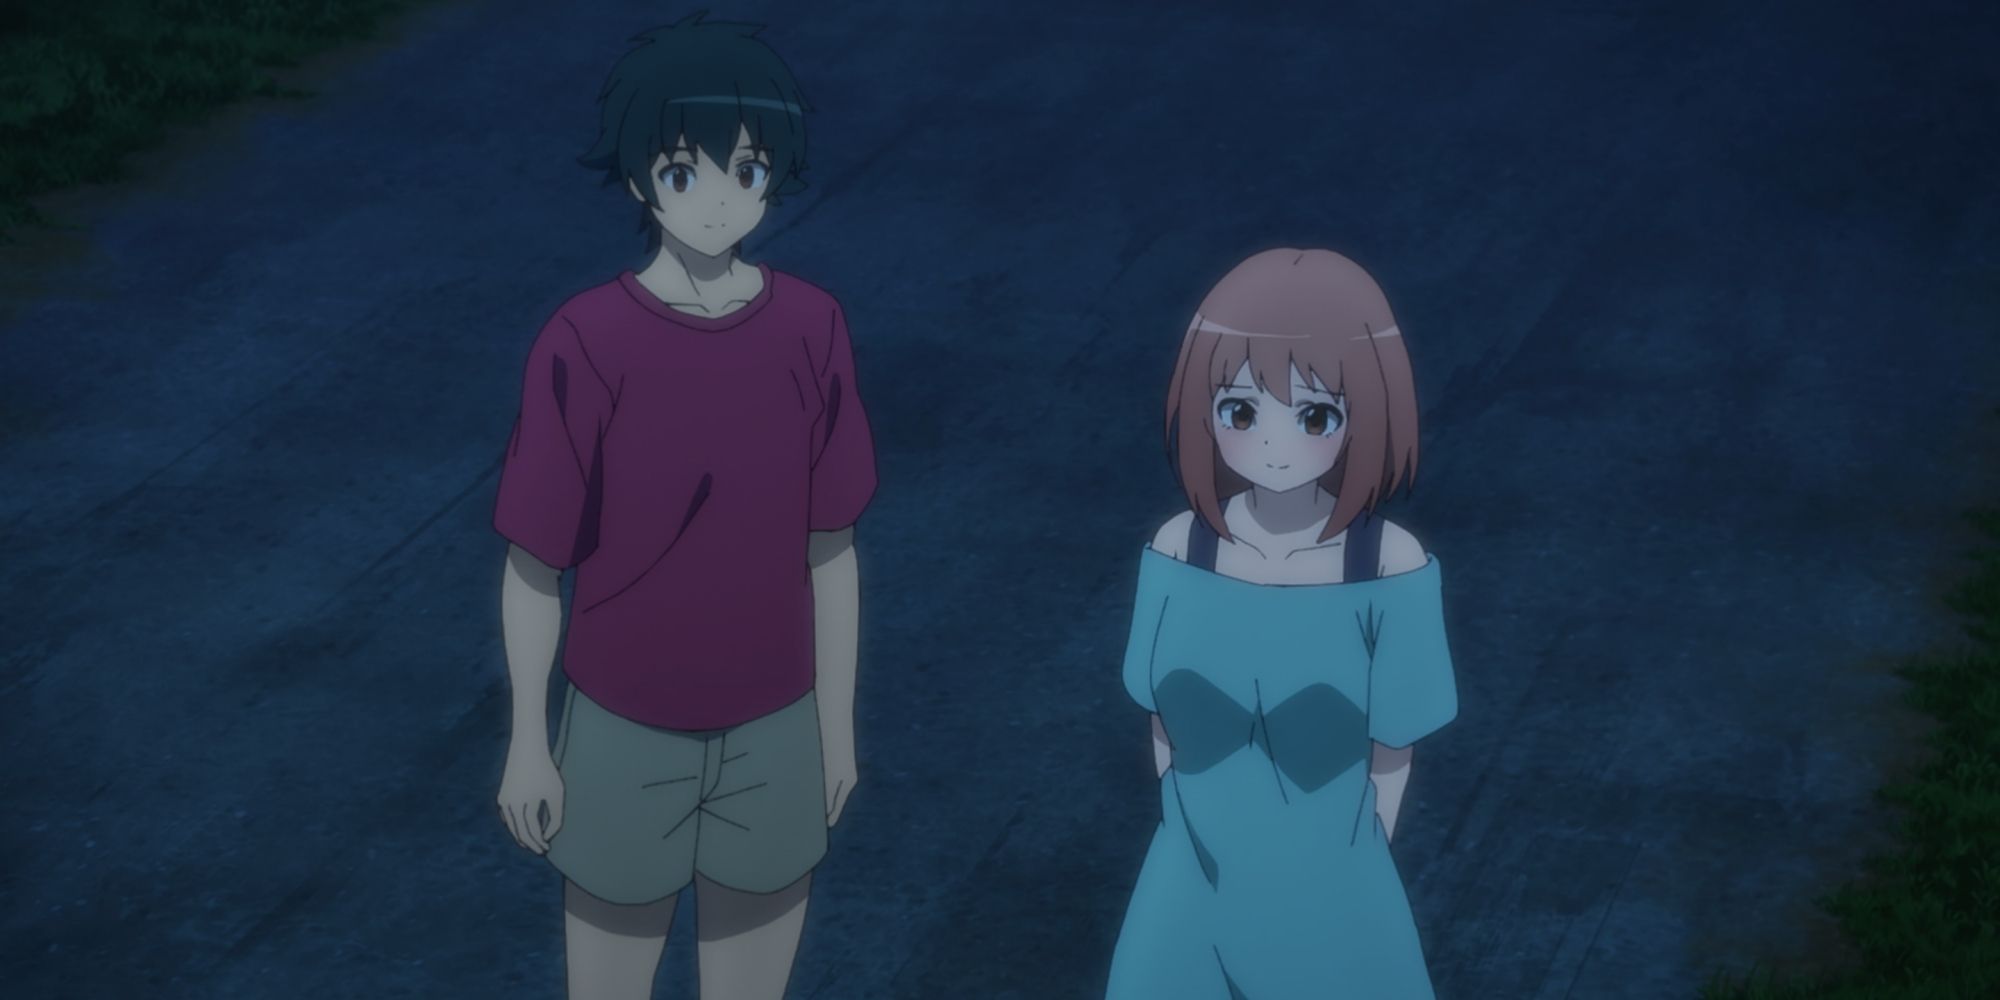 Chiho Sasaki talks to Sadao Maou at night in The Devil Is a Part-Timer!.